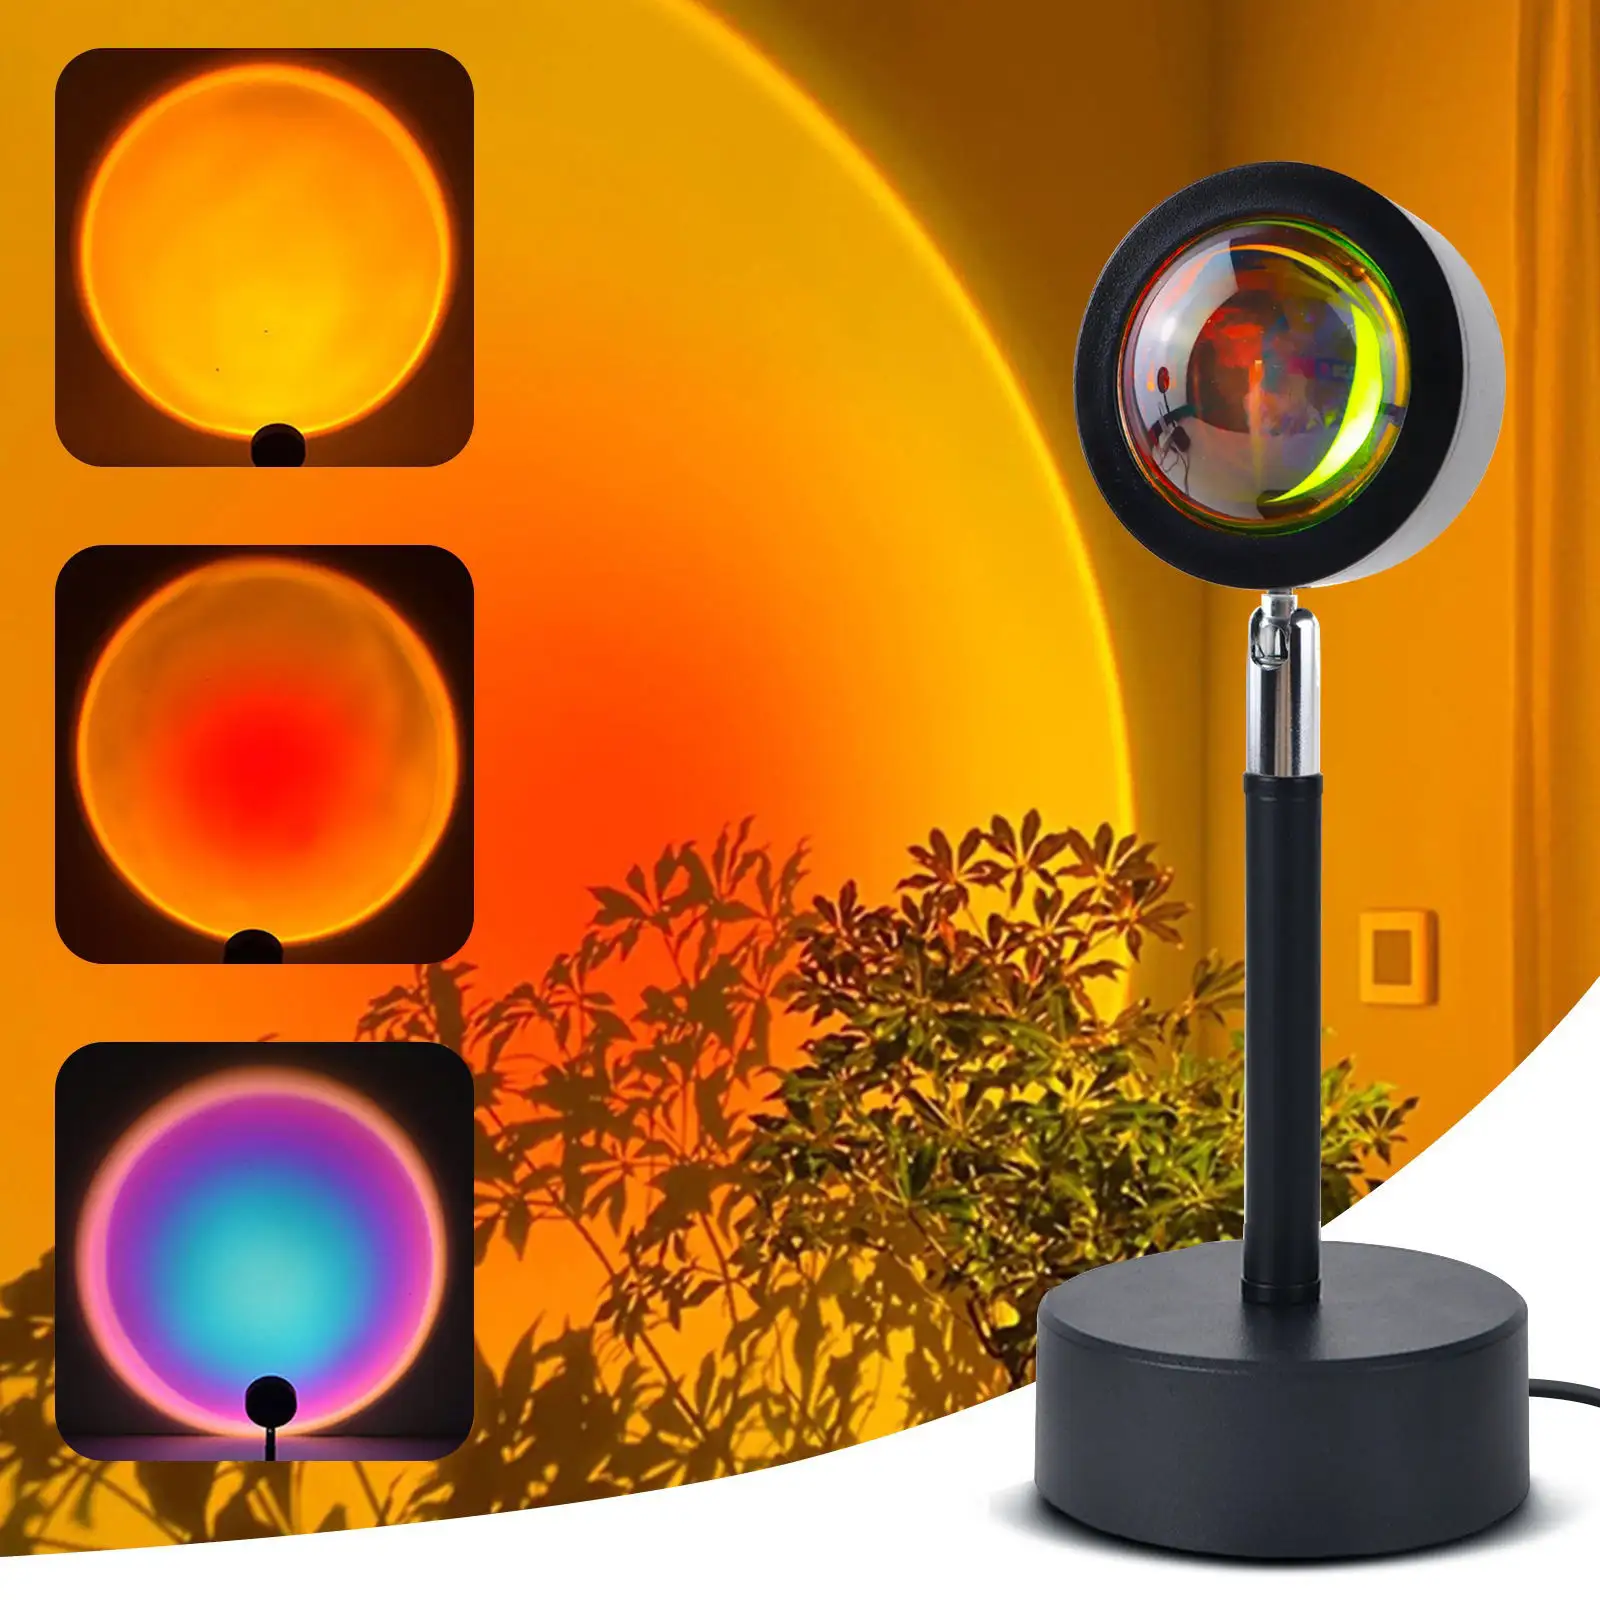 2022 New High Quality Sunset Projector Lamp Led Sunset 180 Degree Rotation Projection Light Lamp For Home Decoration